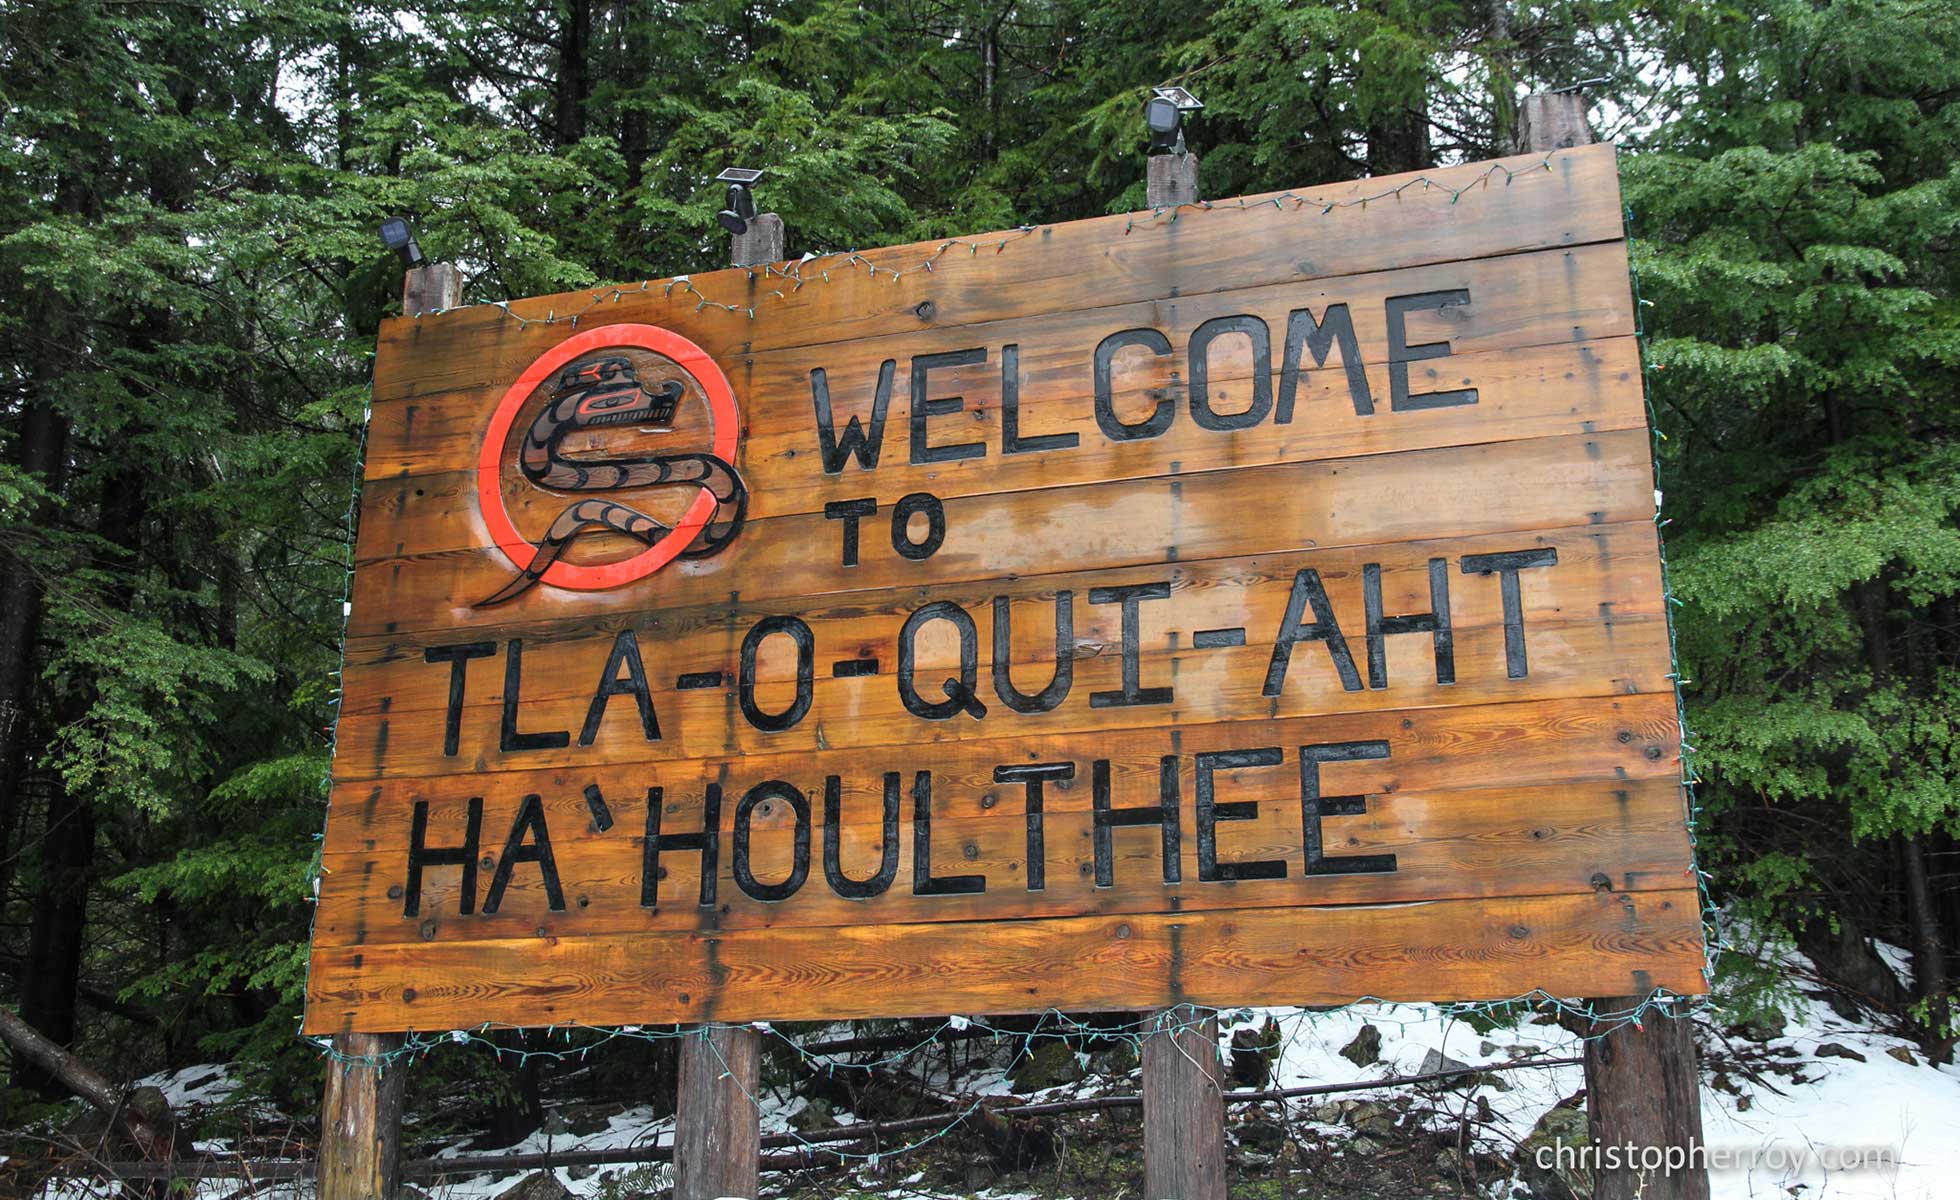 Tla-o-qui-aht tribal park welcome sign